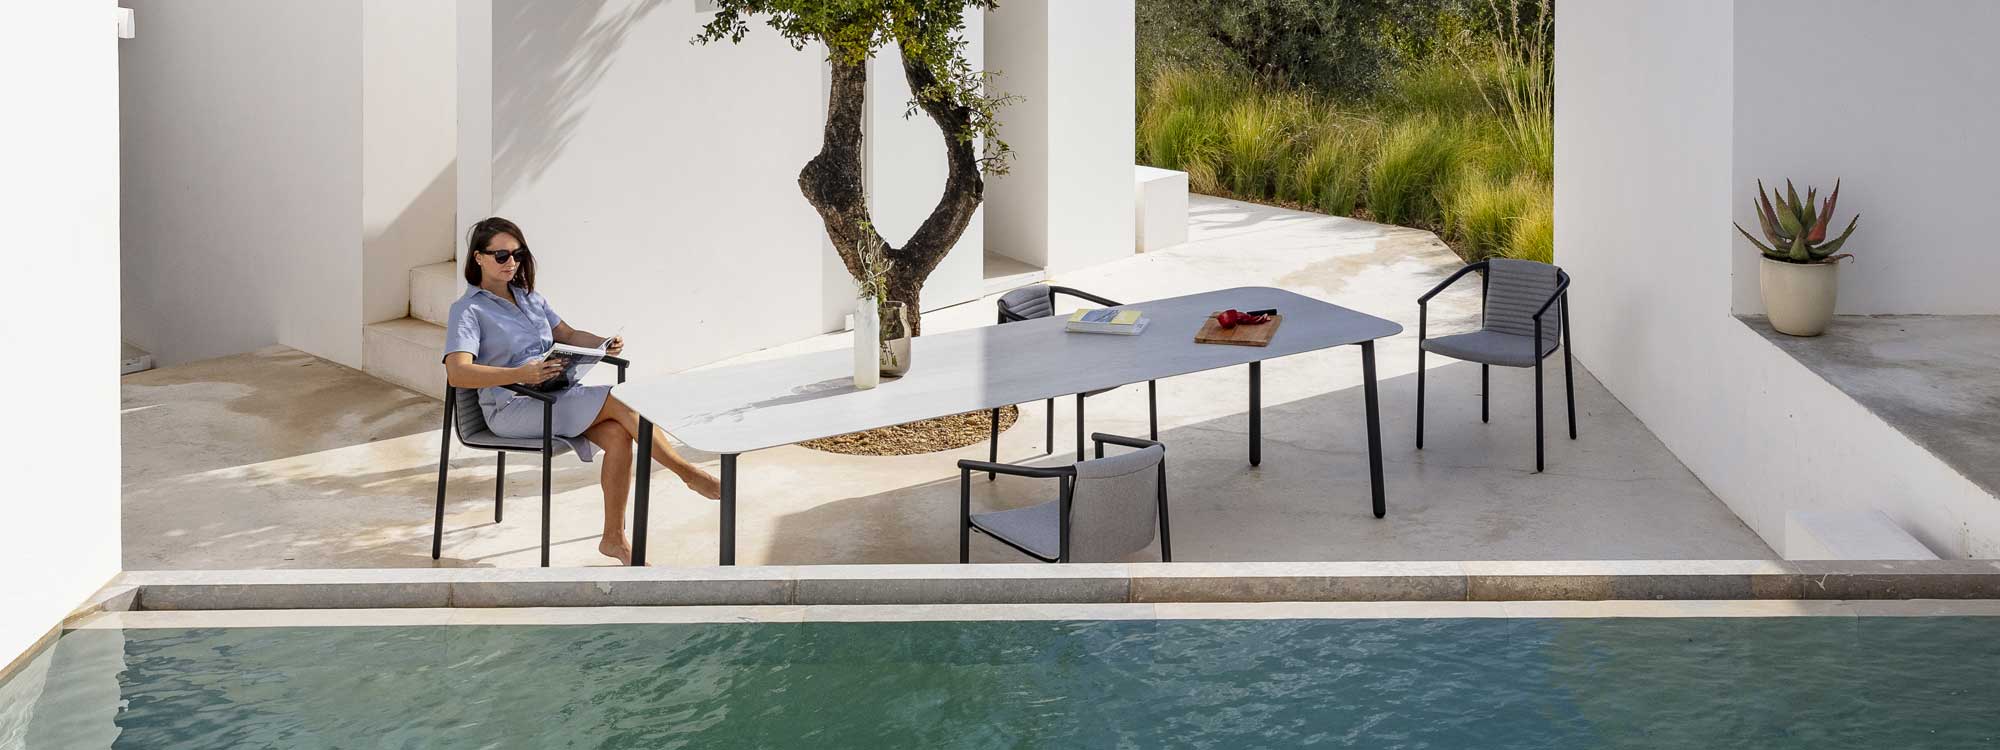 Image of birdseye view of Duct Round outdoor dining chair and Starling garden table between olive tree and swimming pool